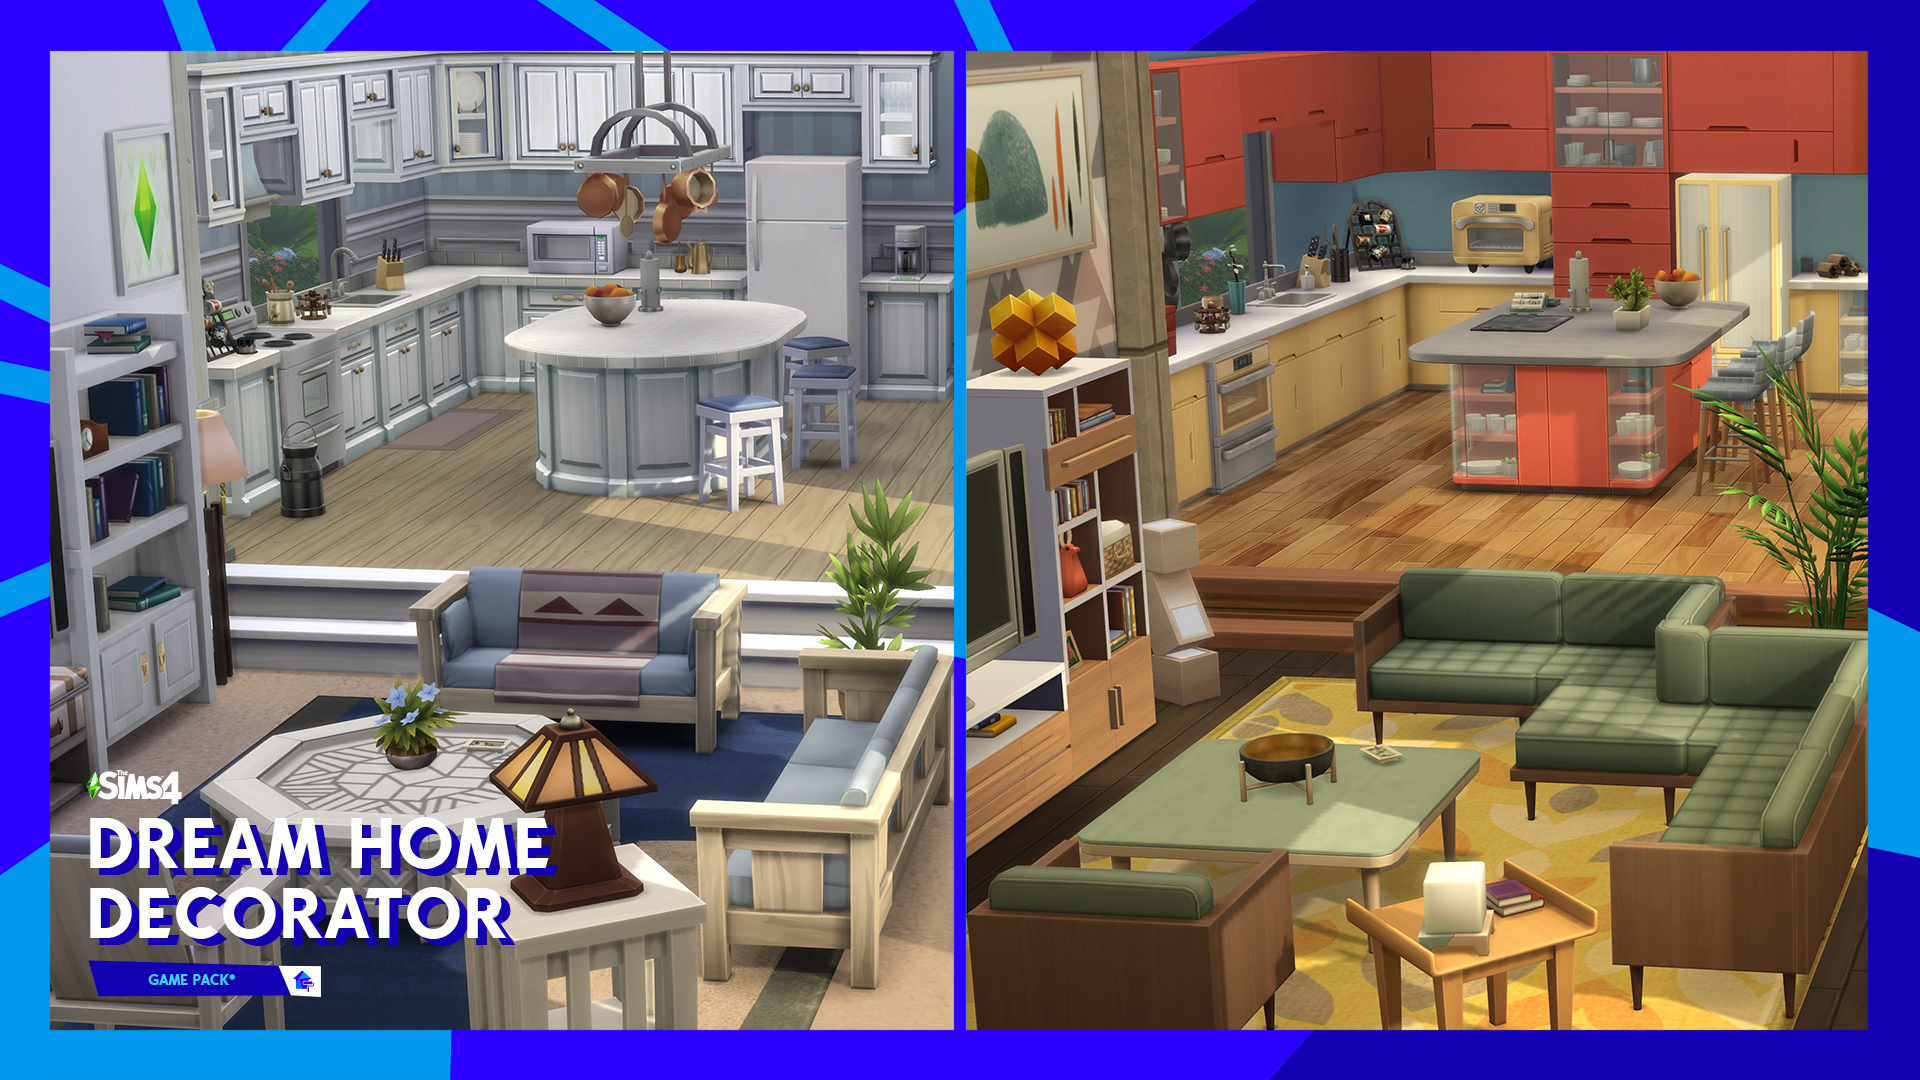 A screenshot of The Sims 4 Dream Home Decorator game pack showing a comparison between a kitchen/living space before and after makeover.